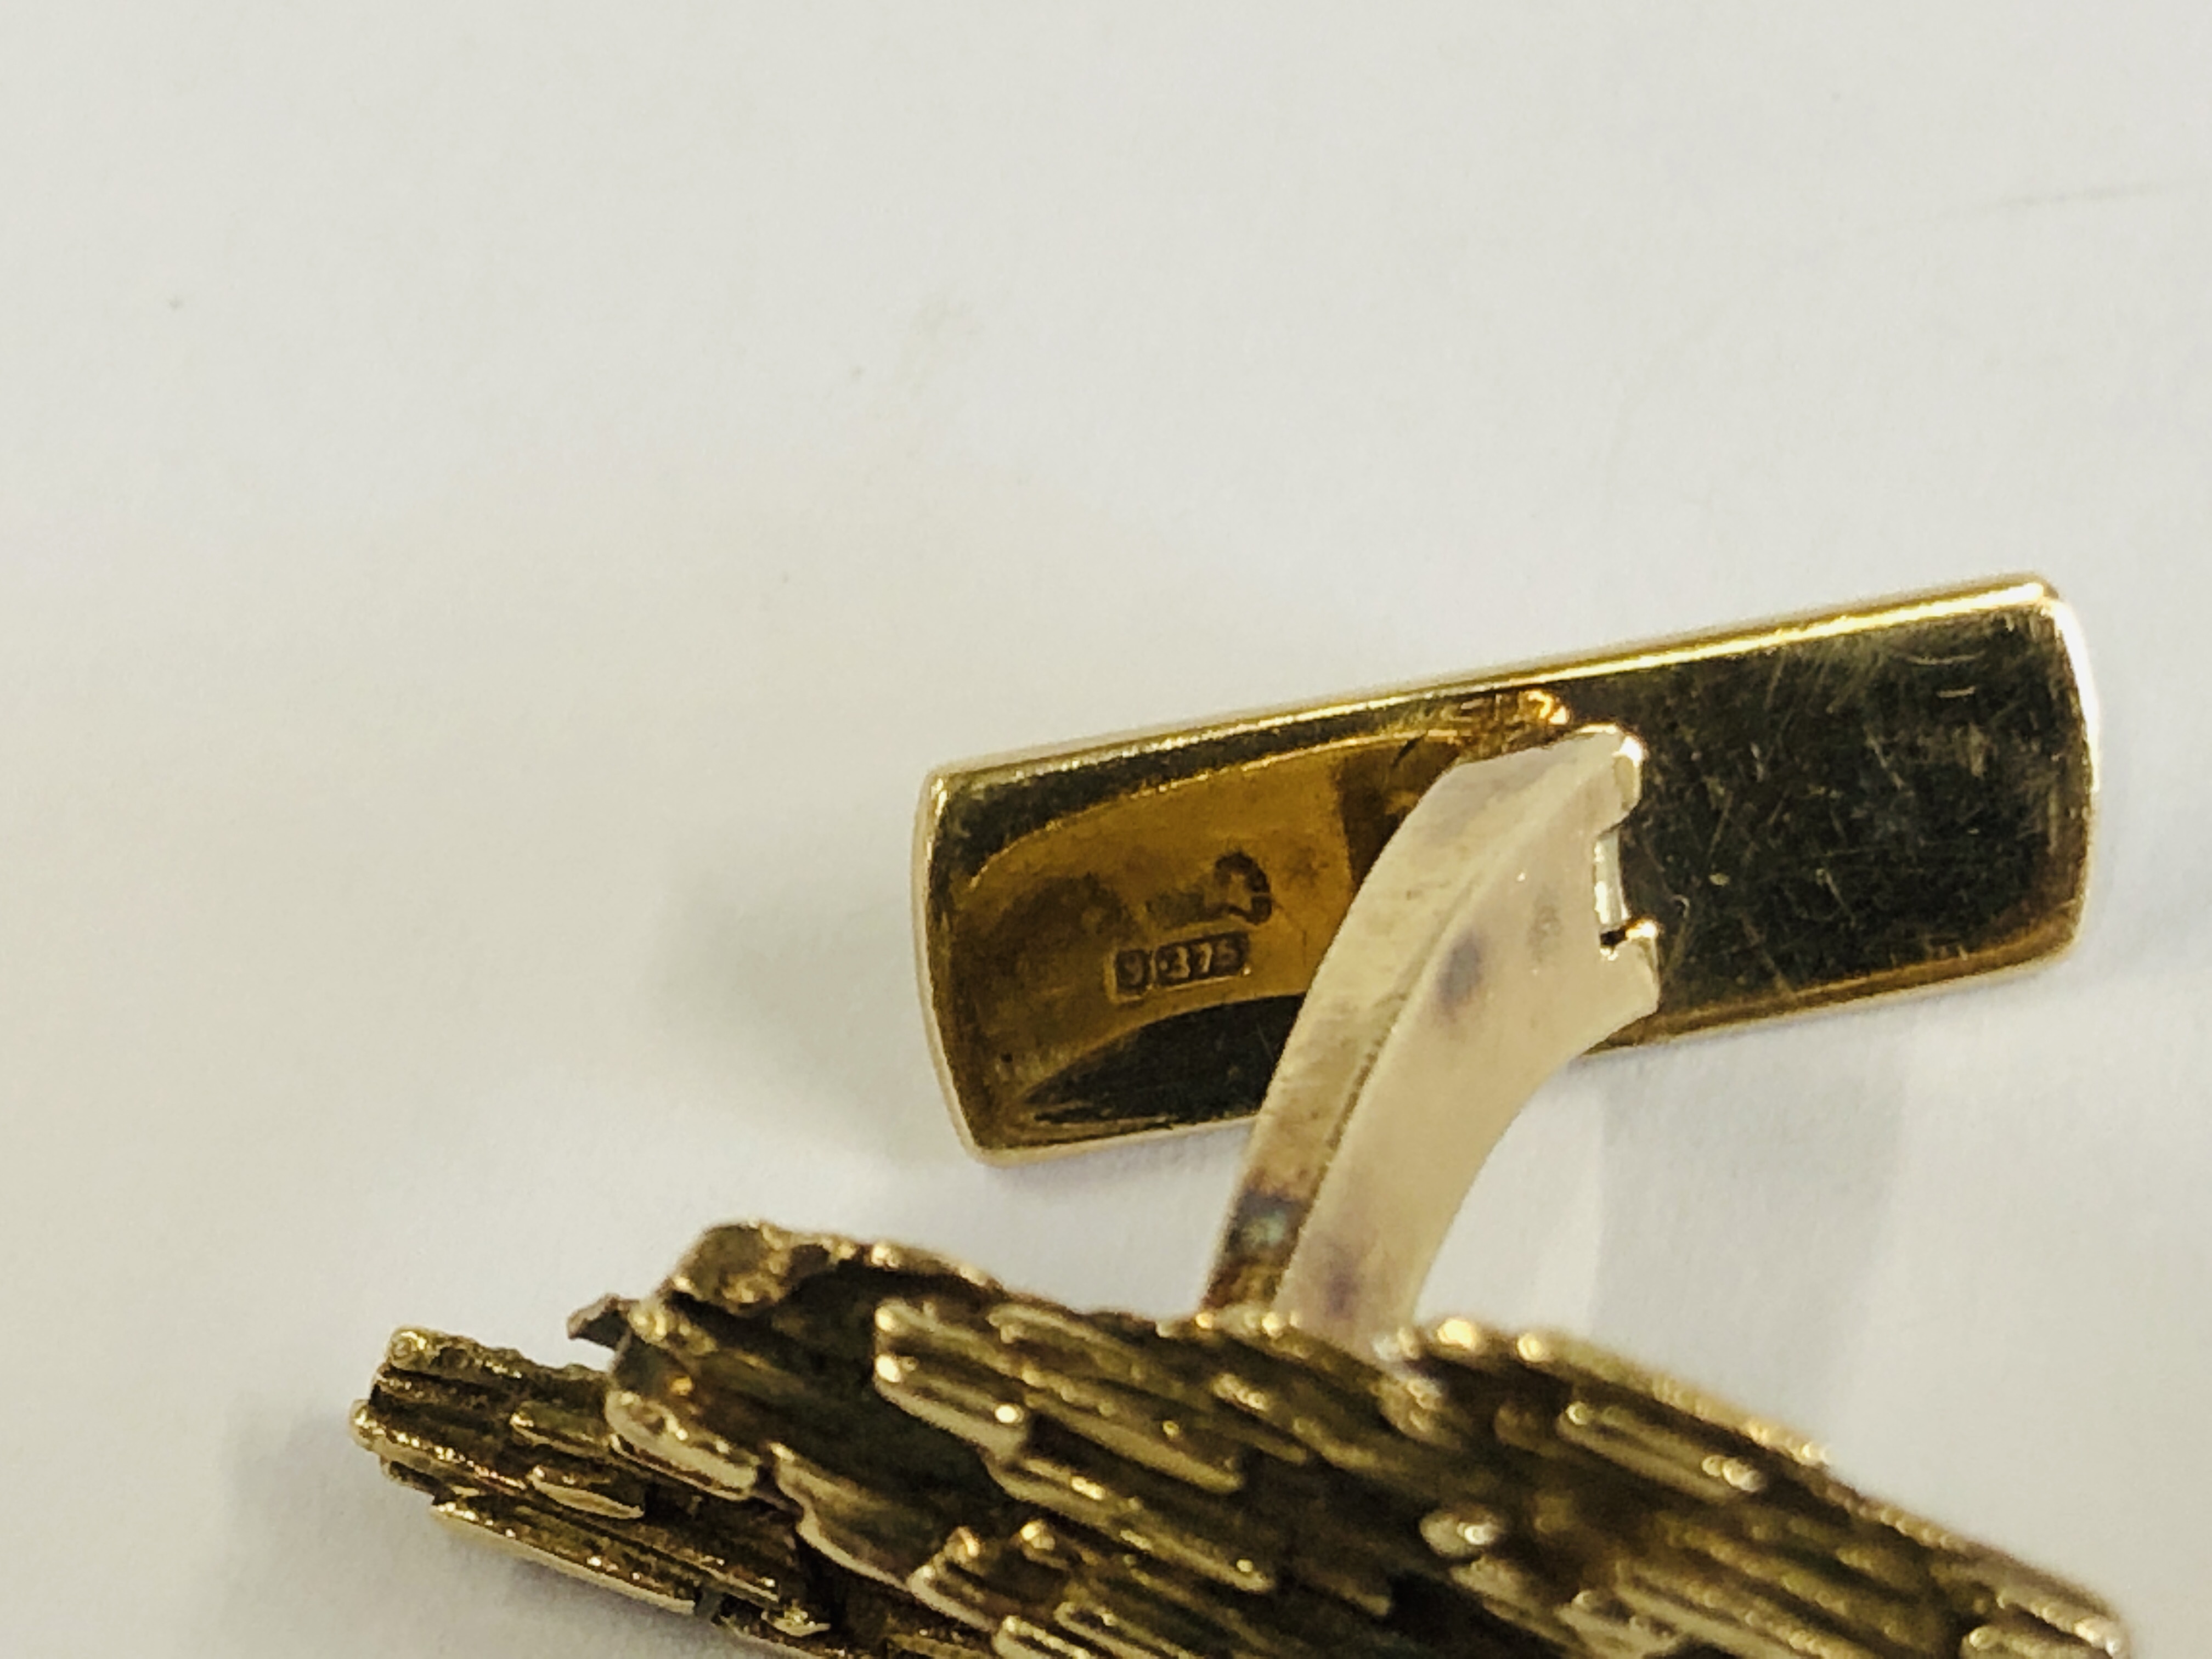 A PAIR OF 9CT GOLD CUFF LINKS OF BARK DESIGN BY C J LTD. - Image 3 of 6